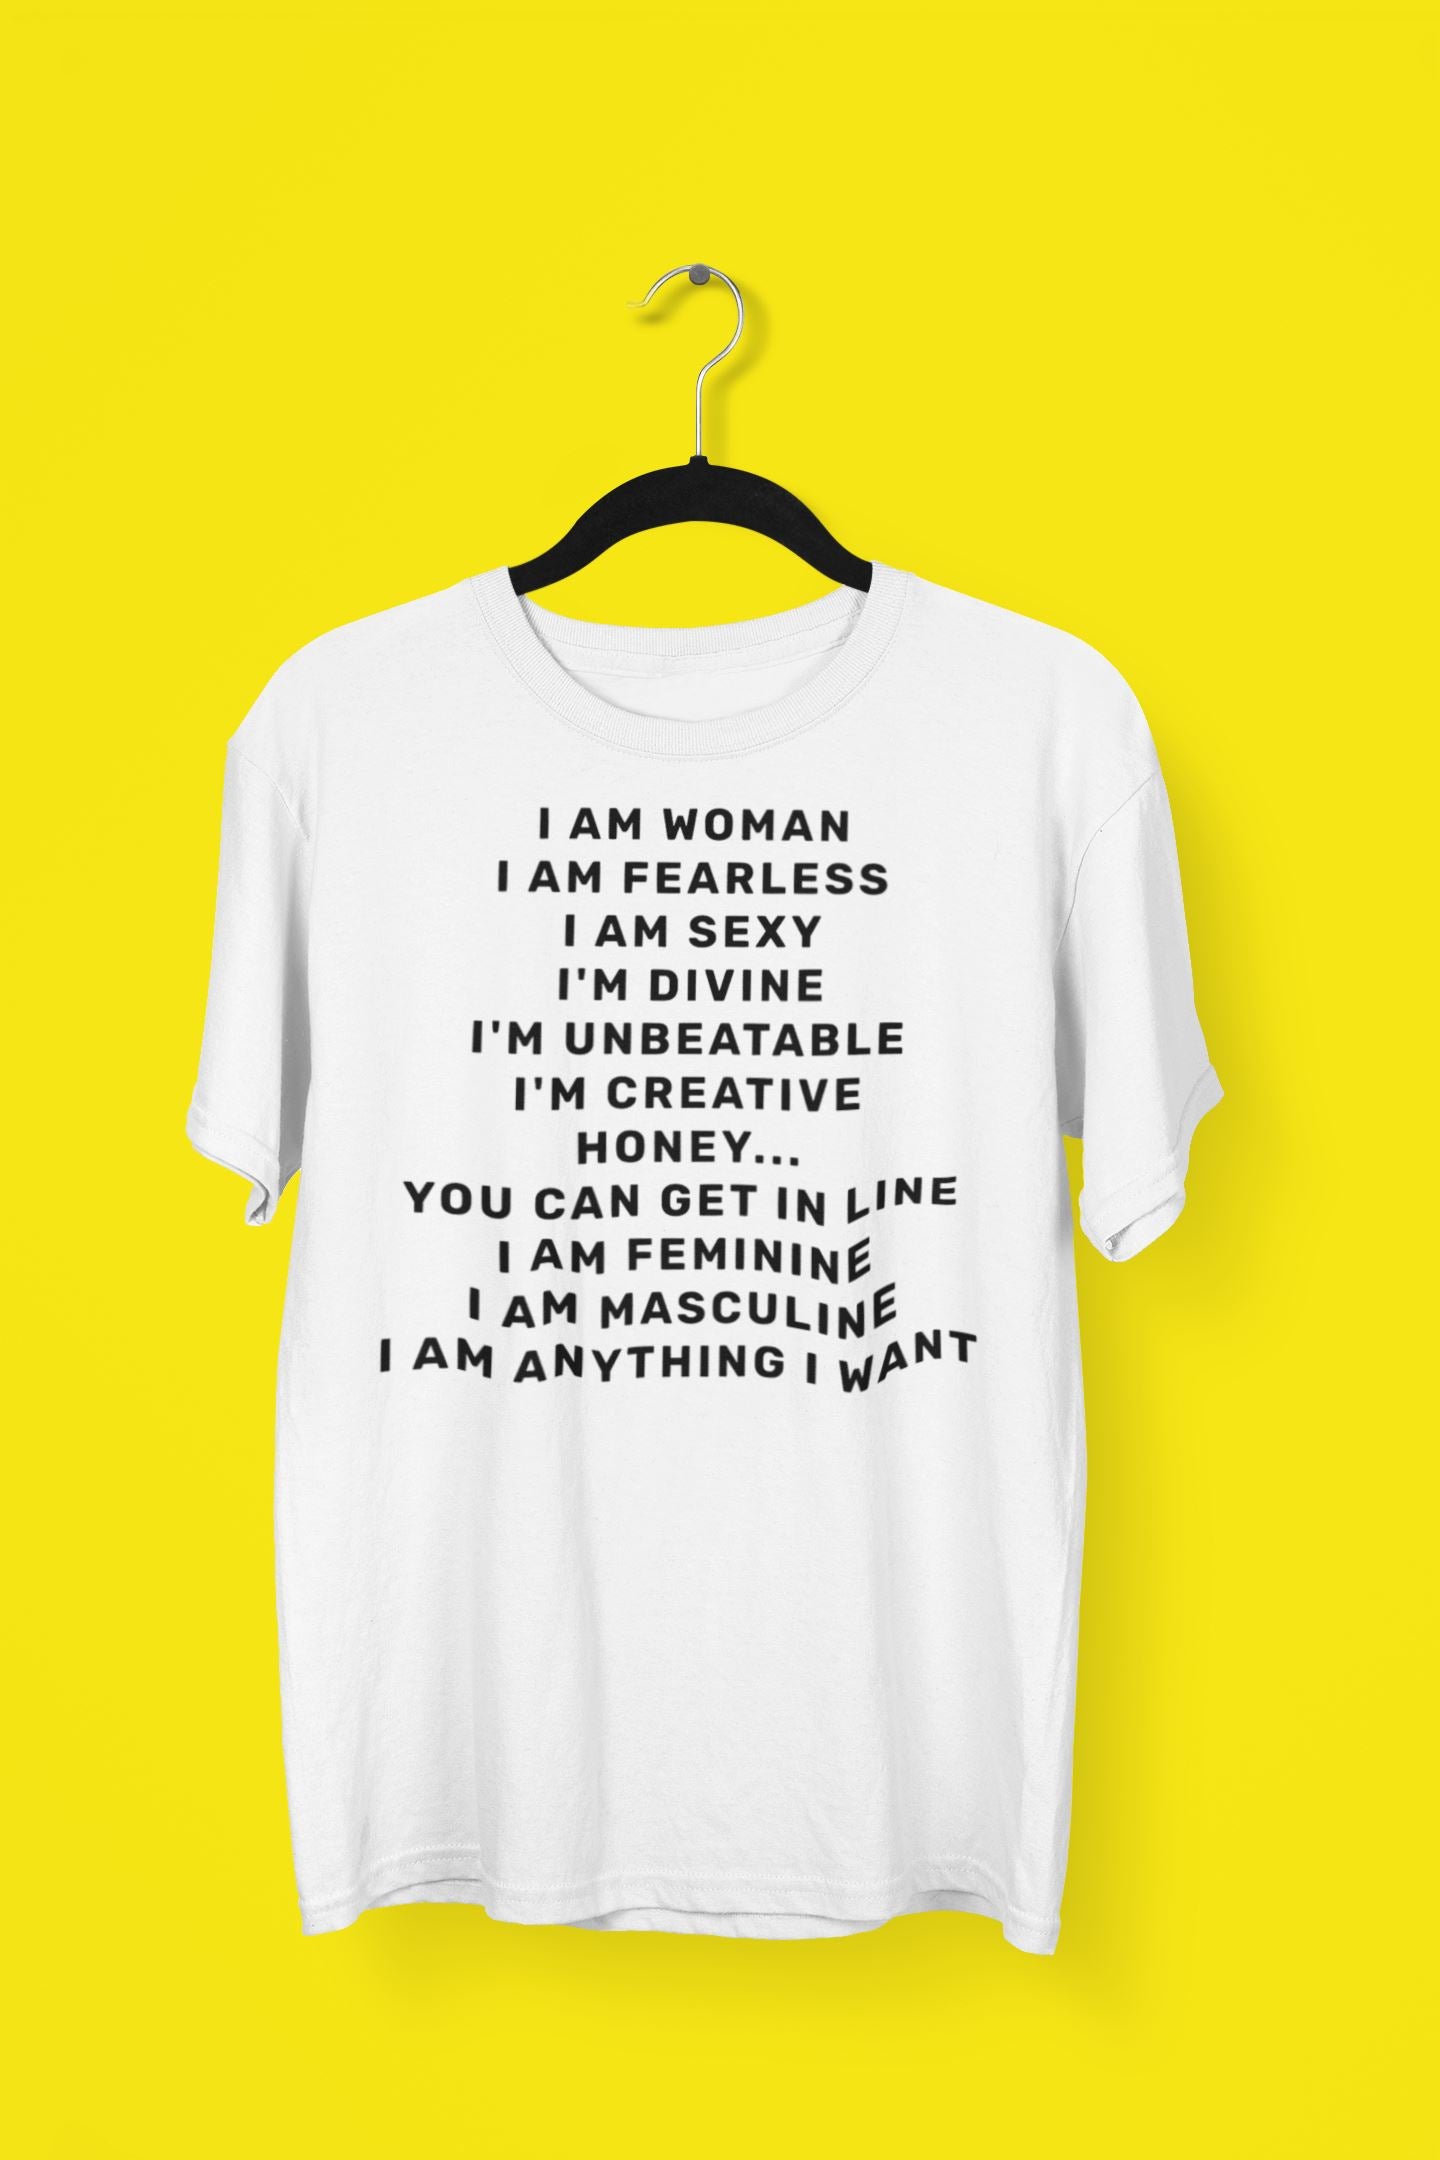 I am Woman Fearless Sexy Divine Special White T Shirt for Women freeshipping - Catch My Drift India